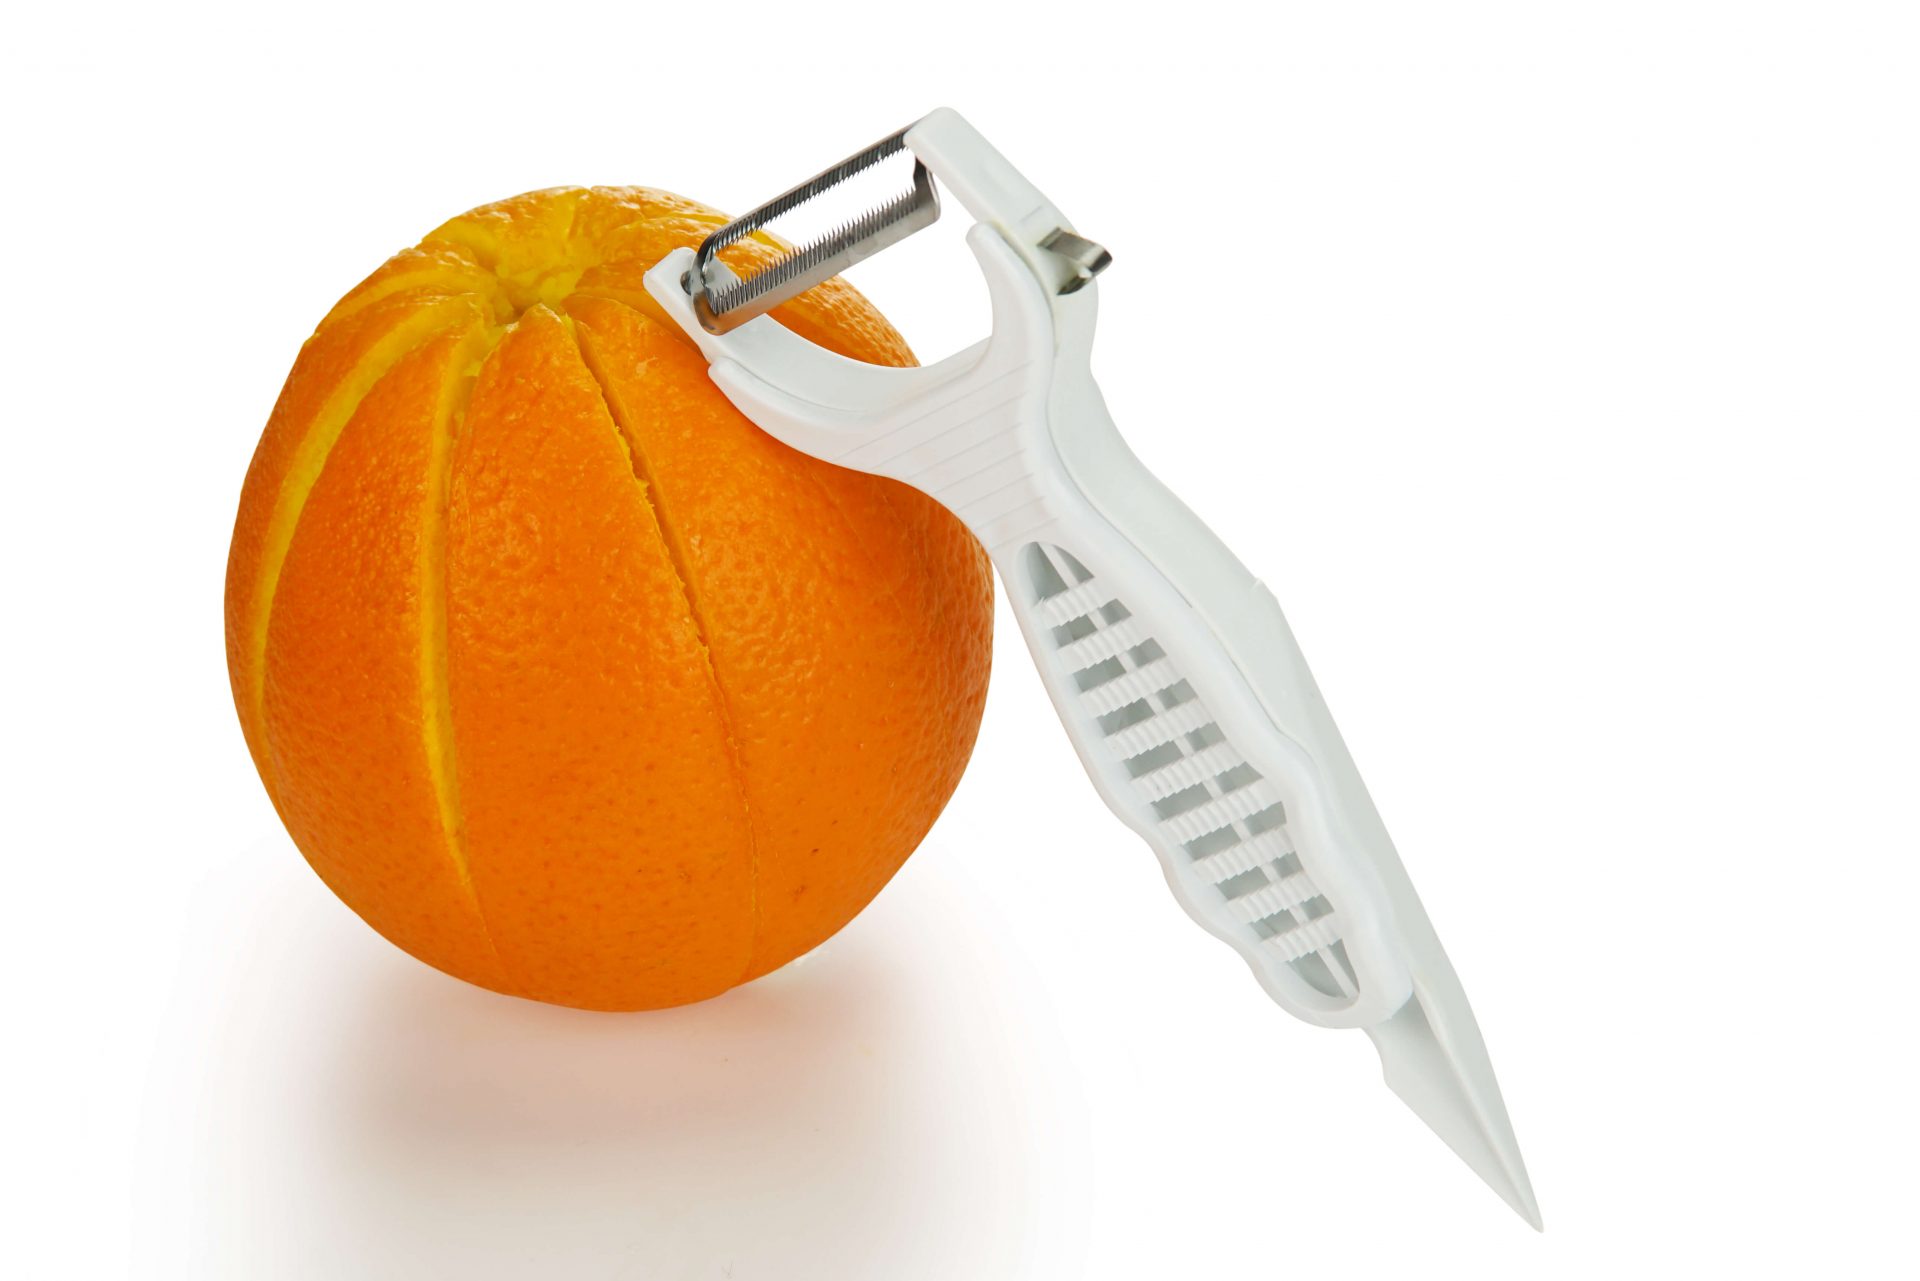 Börner 6-In-1 Peeler (2 Colours) Product Image 2